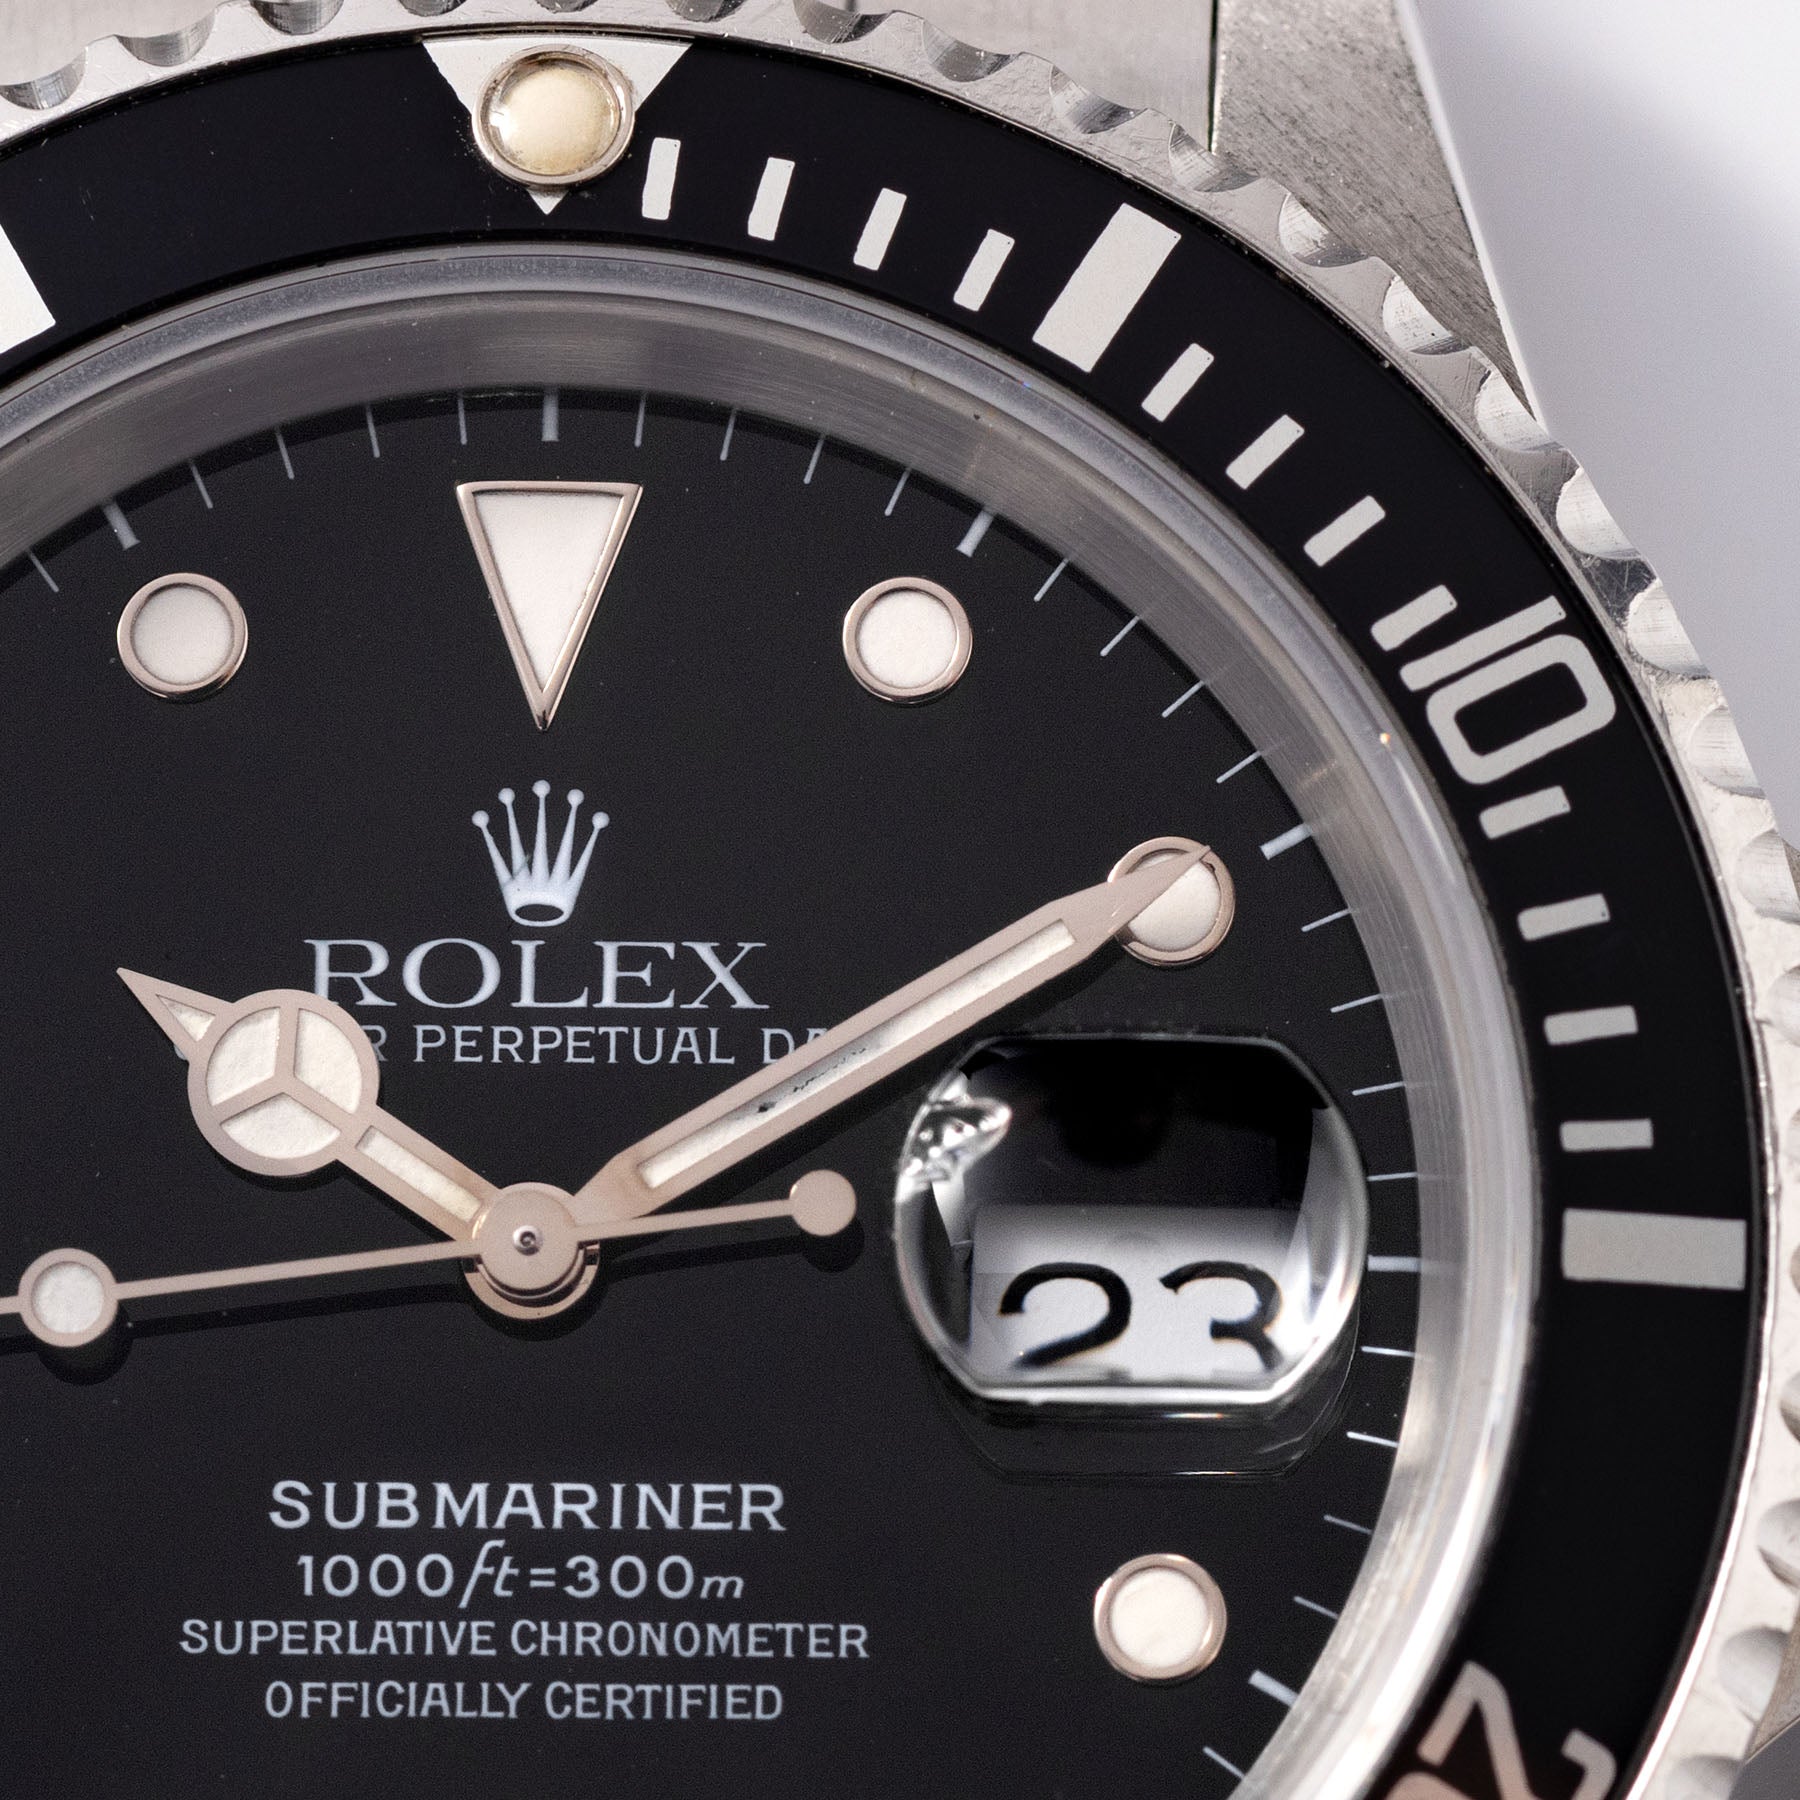 Rolex Submariner Date Reference 16610 with Box and Papers